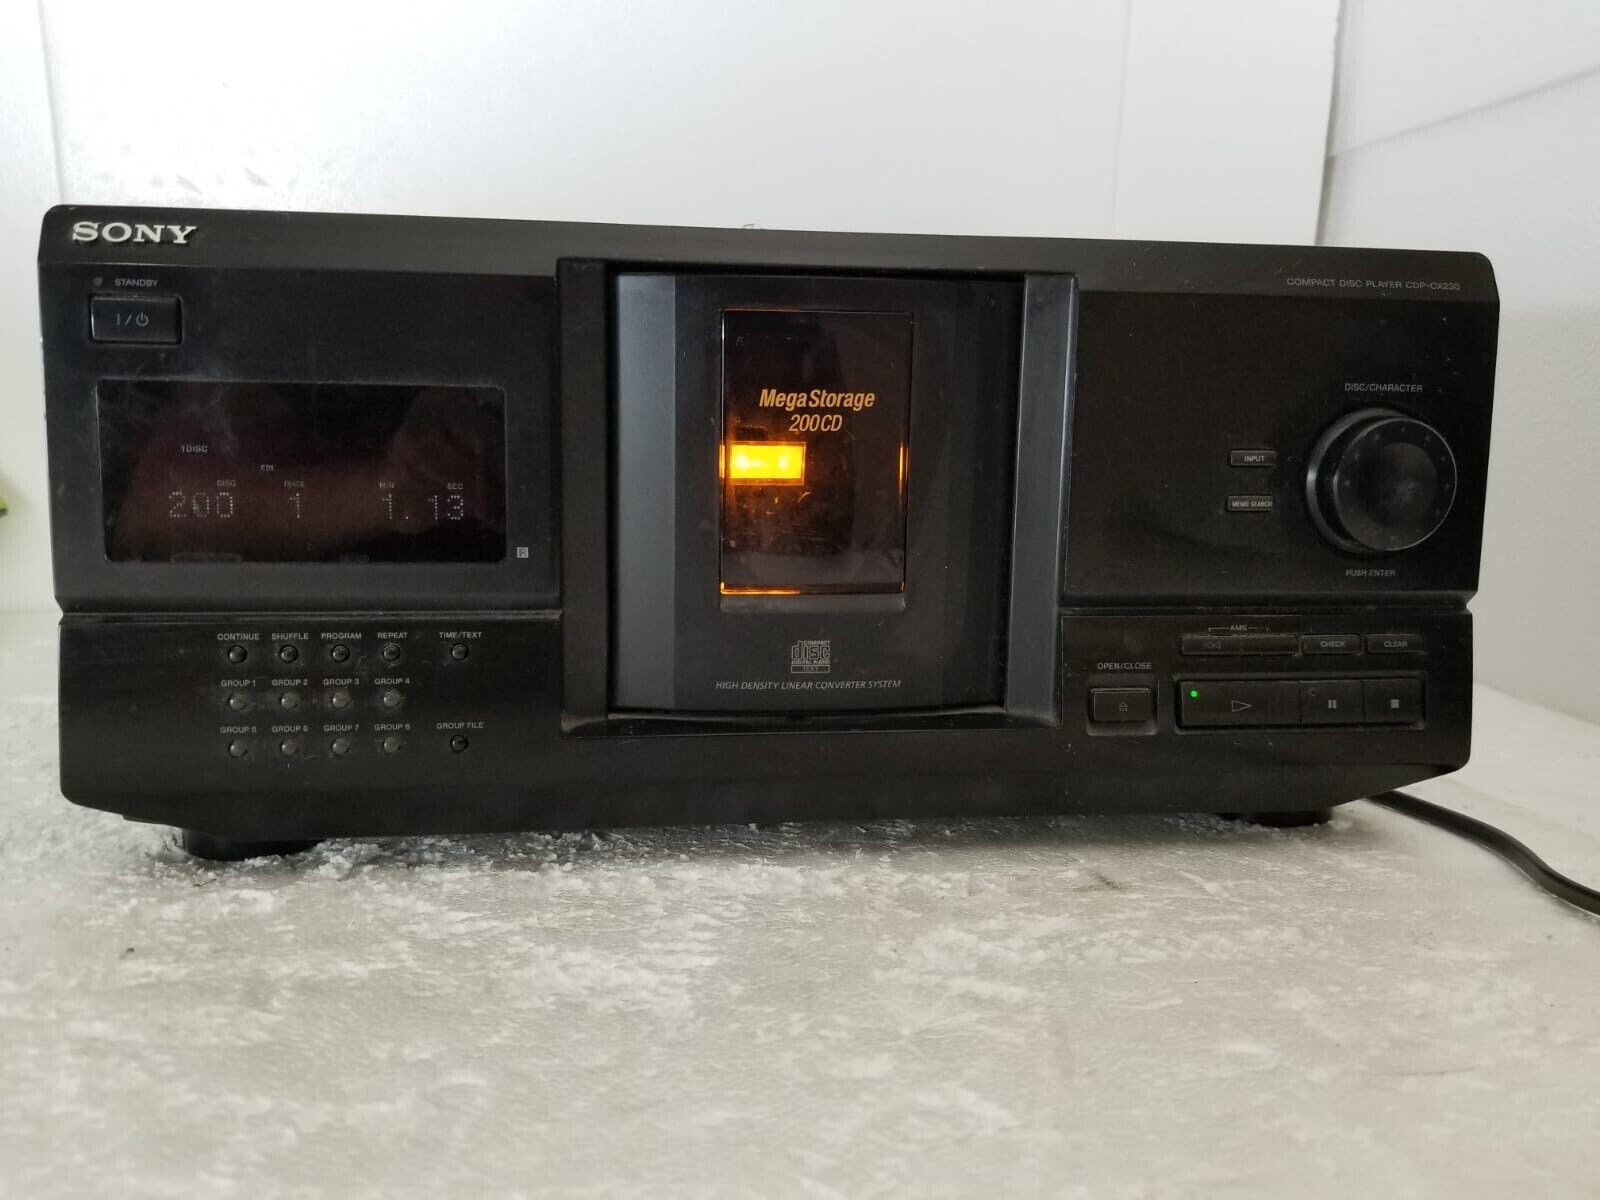 Sony CDP-CX230 Cheap Elegant super special price Megastorage 200 CD Changer Compact Player Te Disc